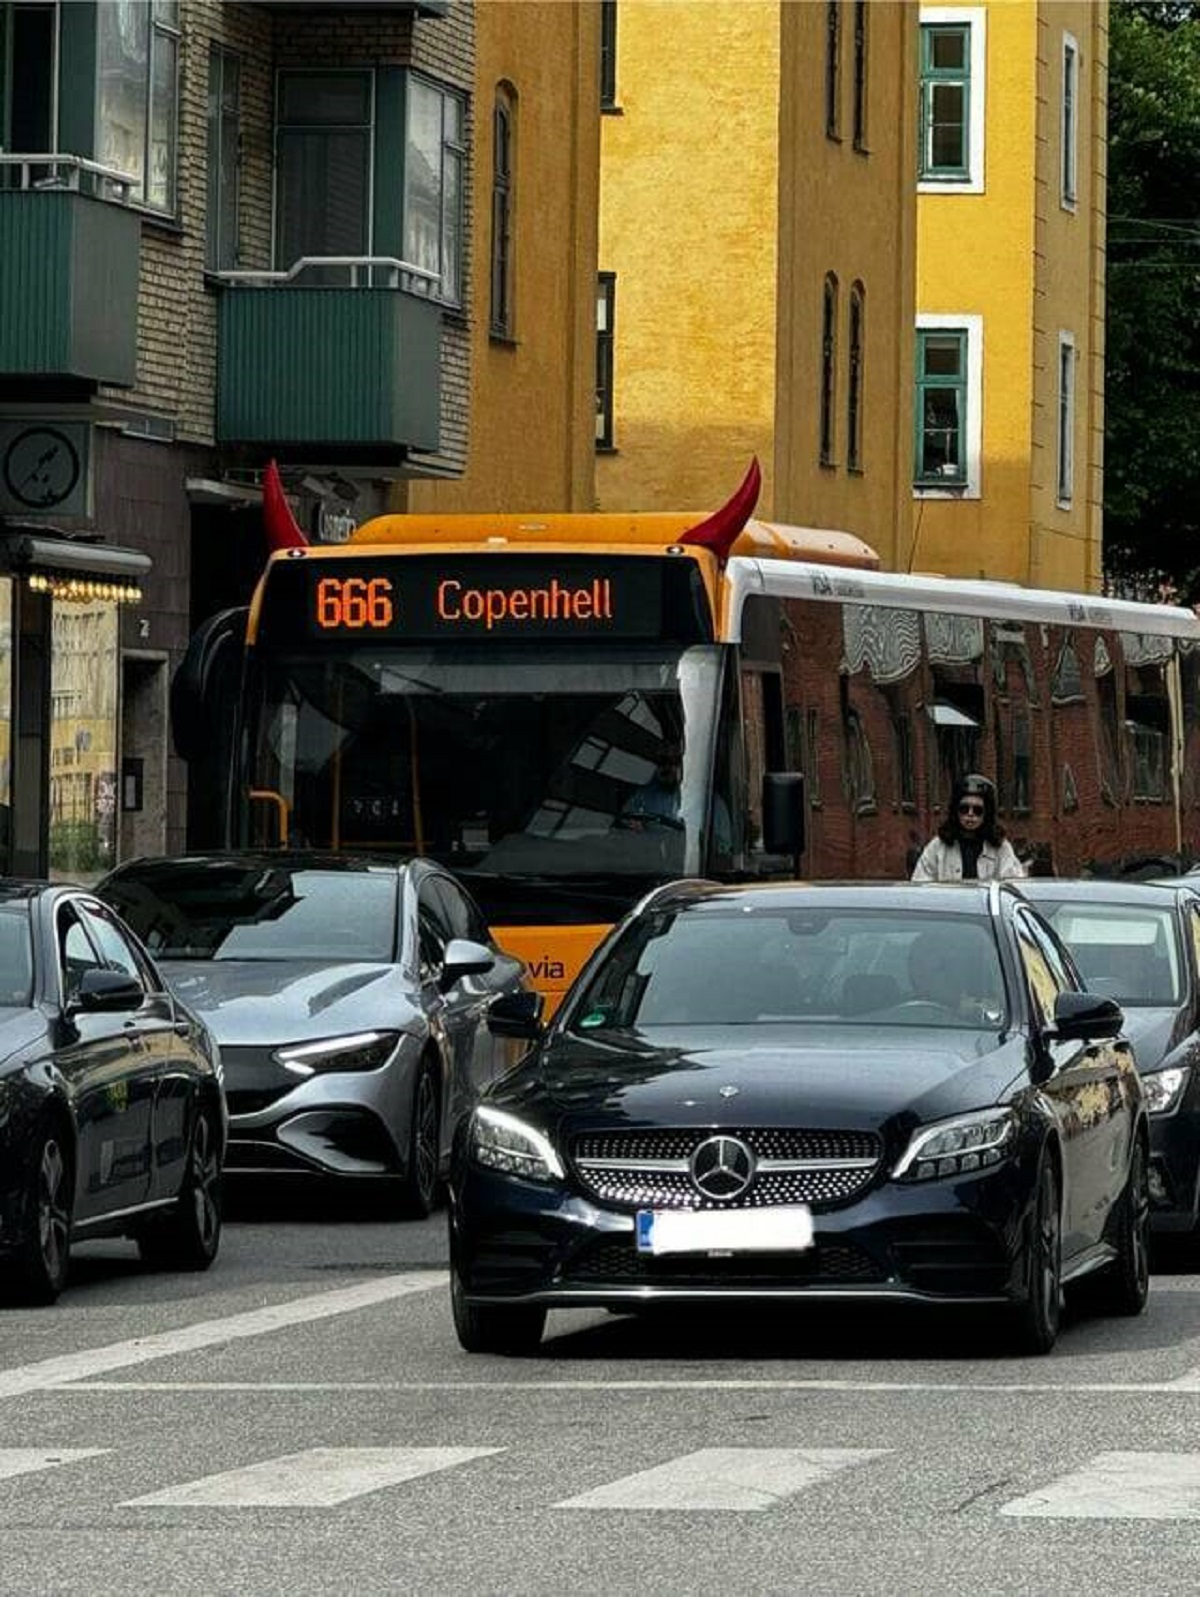 "The buses going to Copenhagens biggest Rock/Metal festival have the number 666 (and horns)"